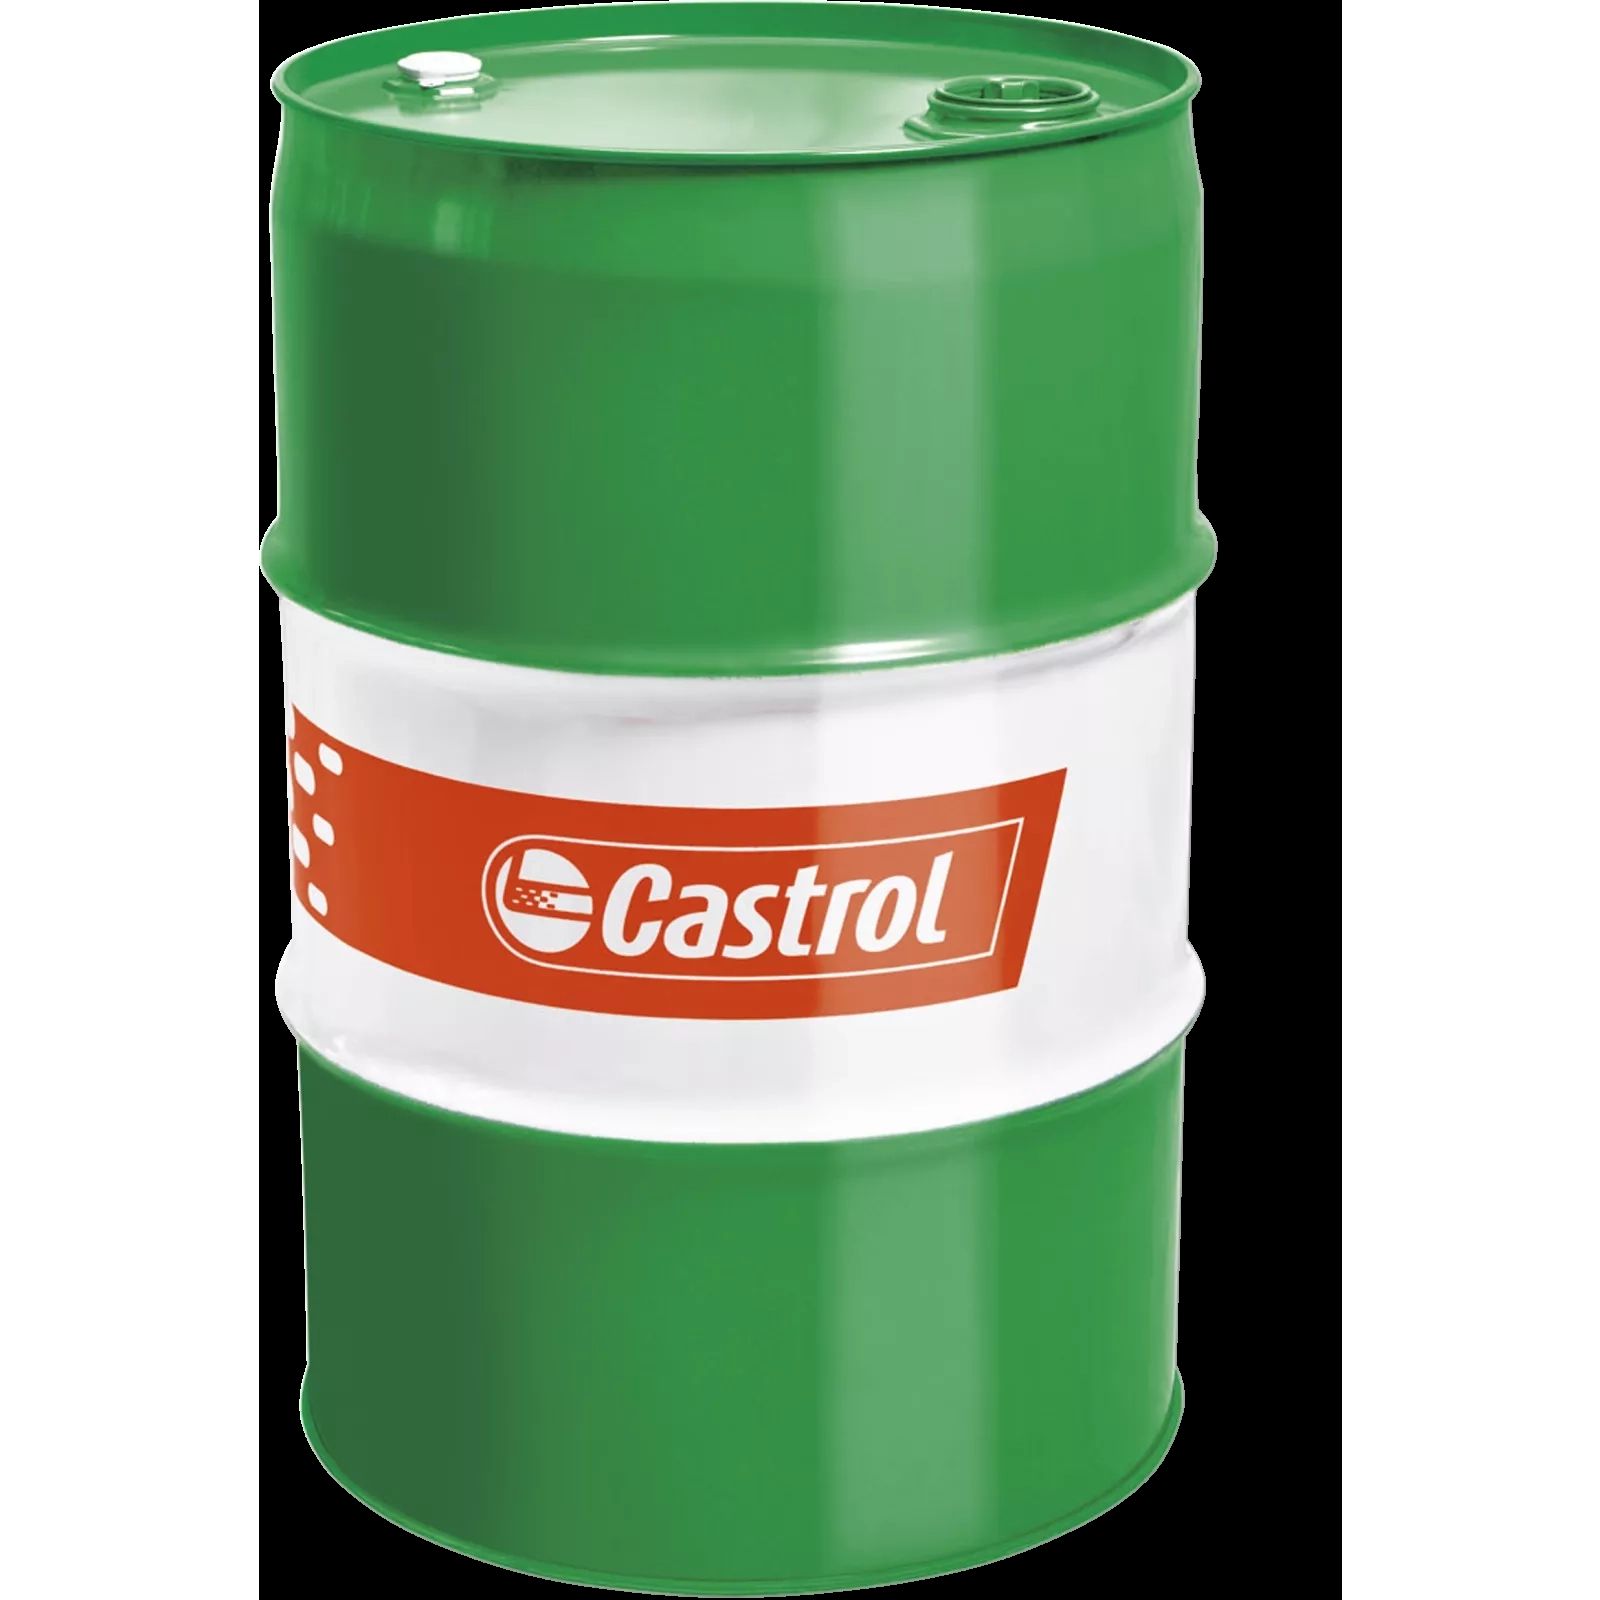 https://www.autoteile-store.at/img/product/castrol-edge-5w-30-ll-208l-15664f-760/e192284eb013a38b675d7870f2d5ed74_1600.jpg